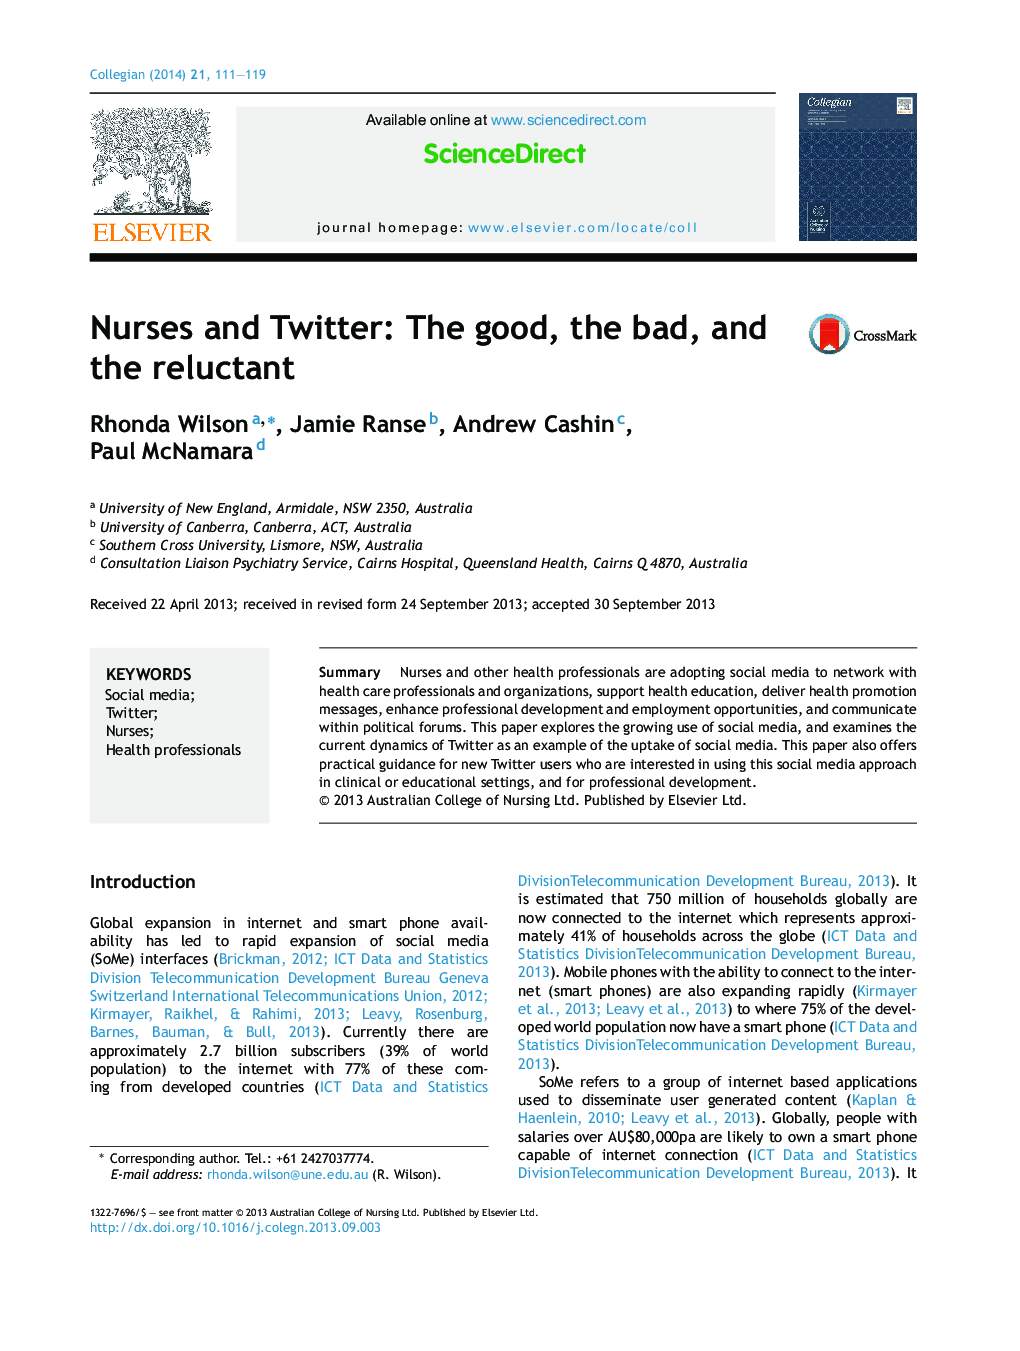 Nurses and Twitter: The good, the bad, and the reluctant